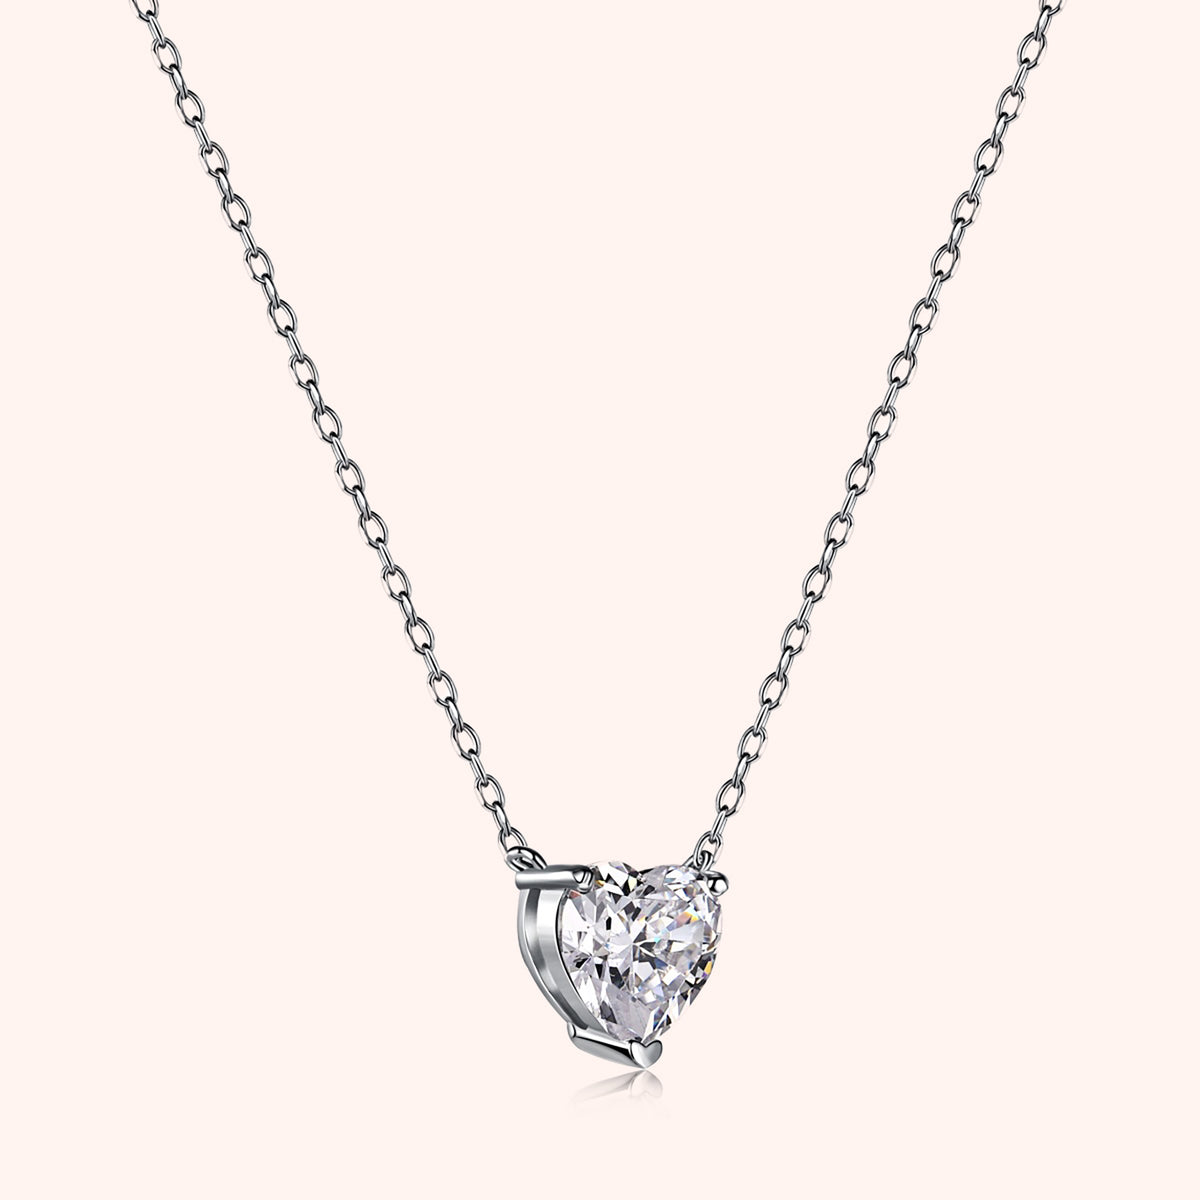 Silver Moonrise Heart Necklace